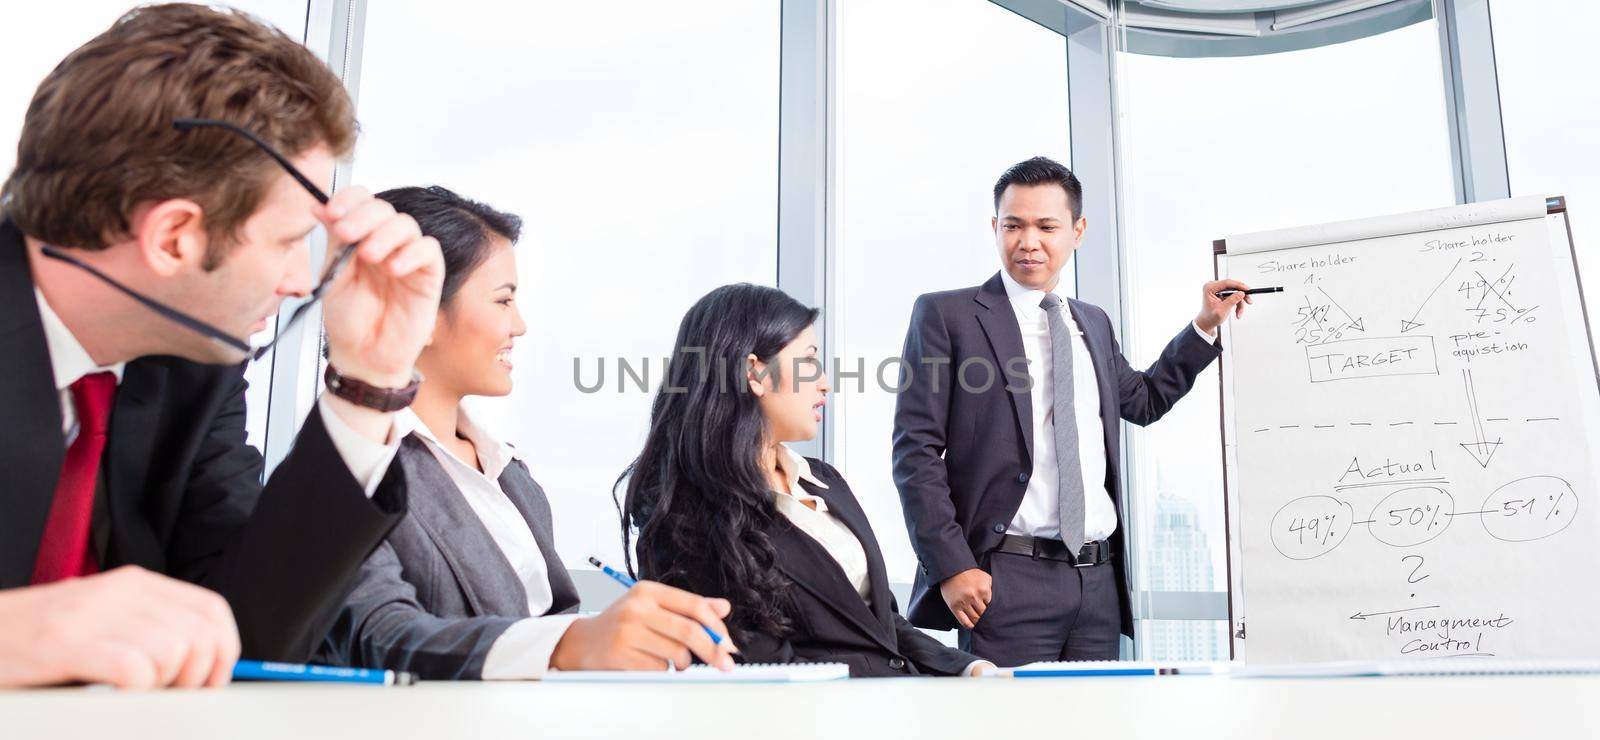 Business team discussing acquisition in meeting